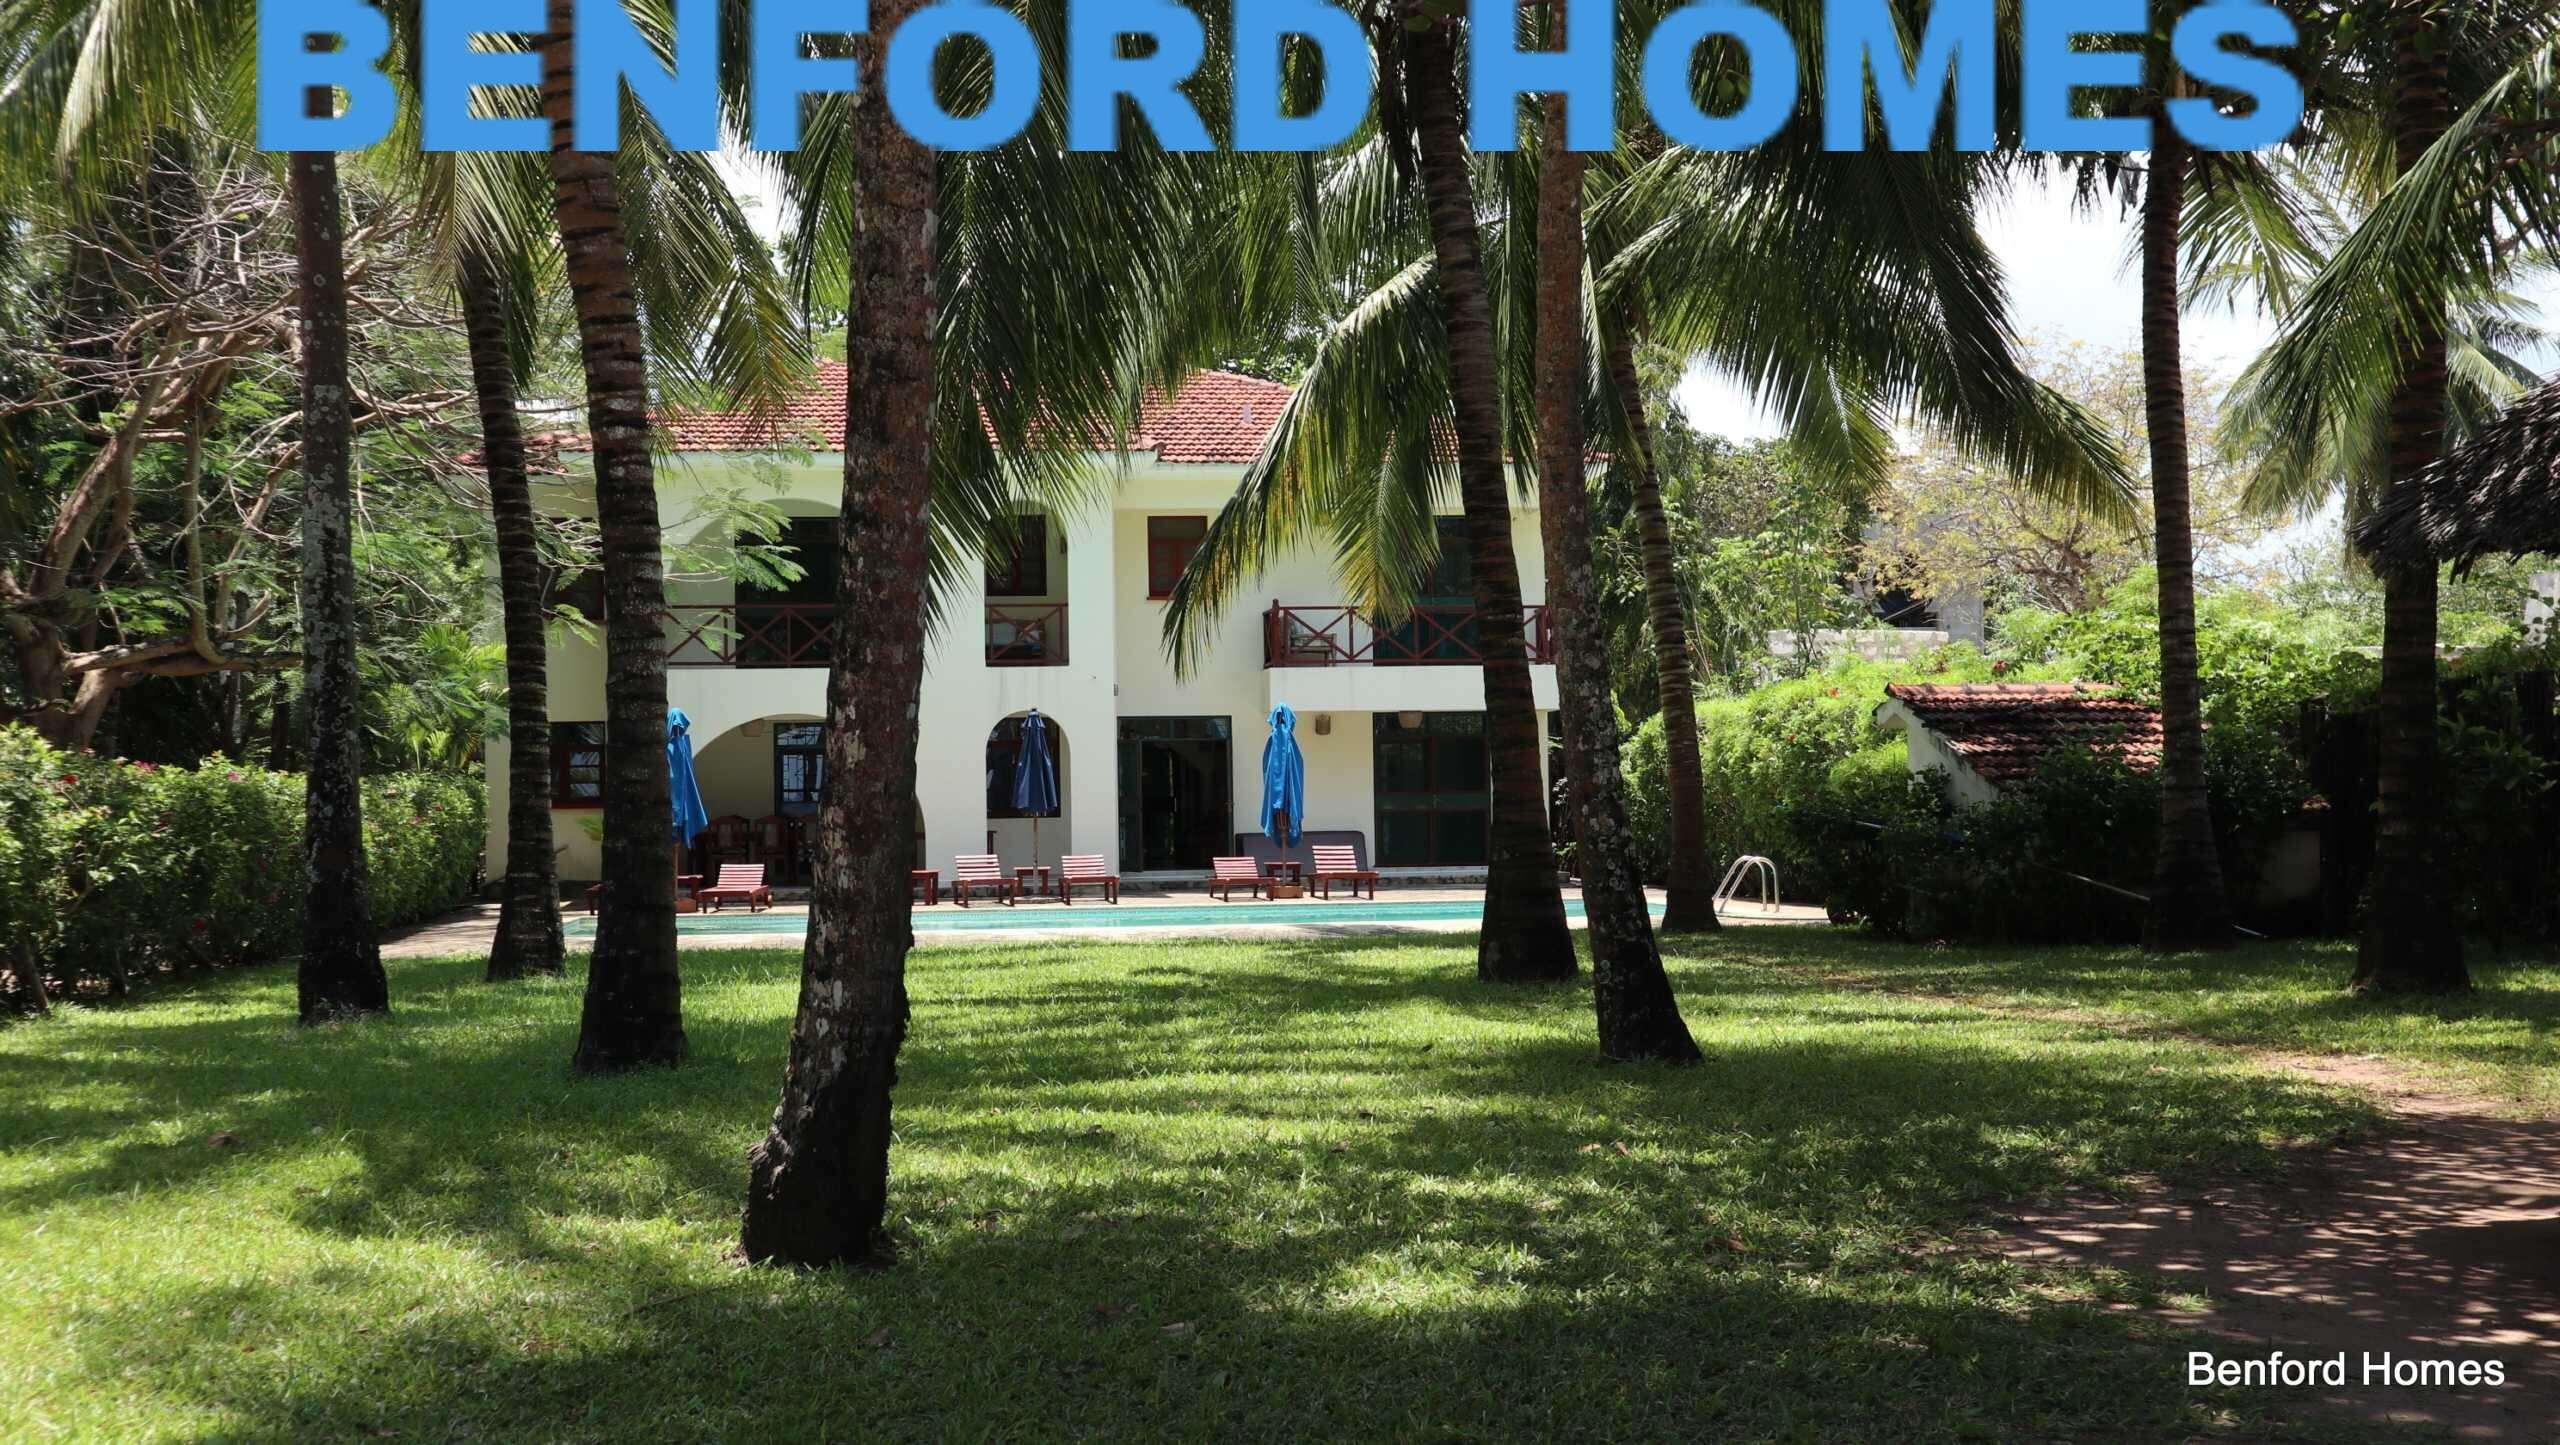 Garden and tree lined villa with beach breeze and view| Benford Homes